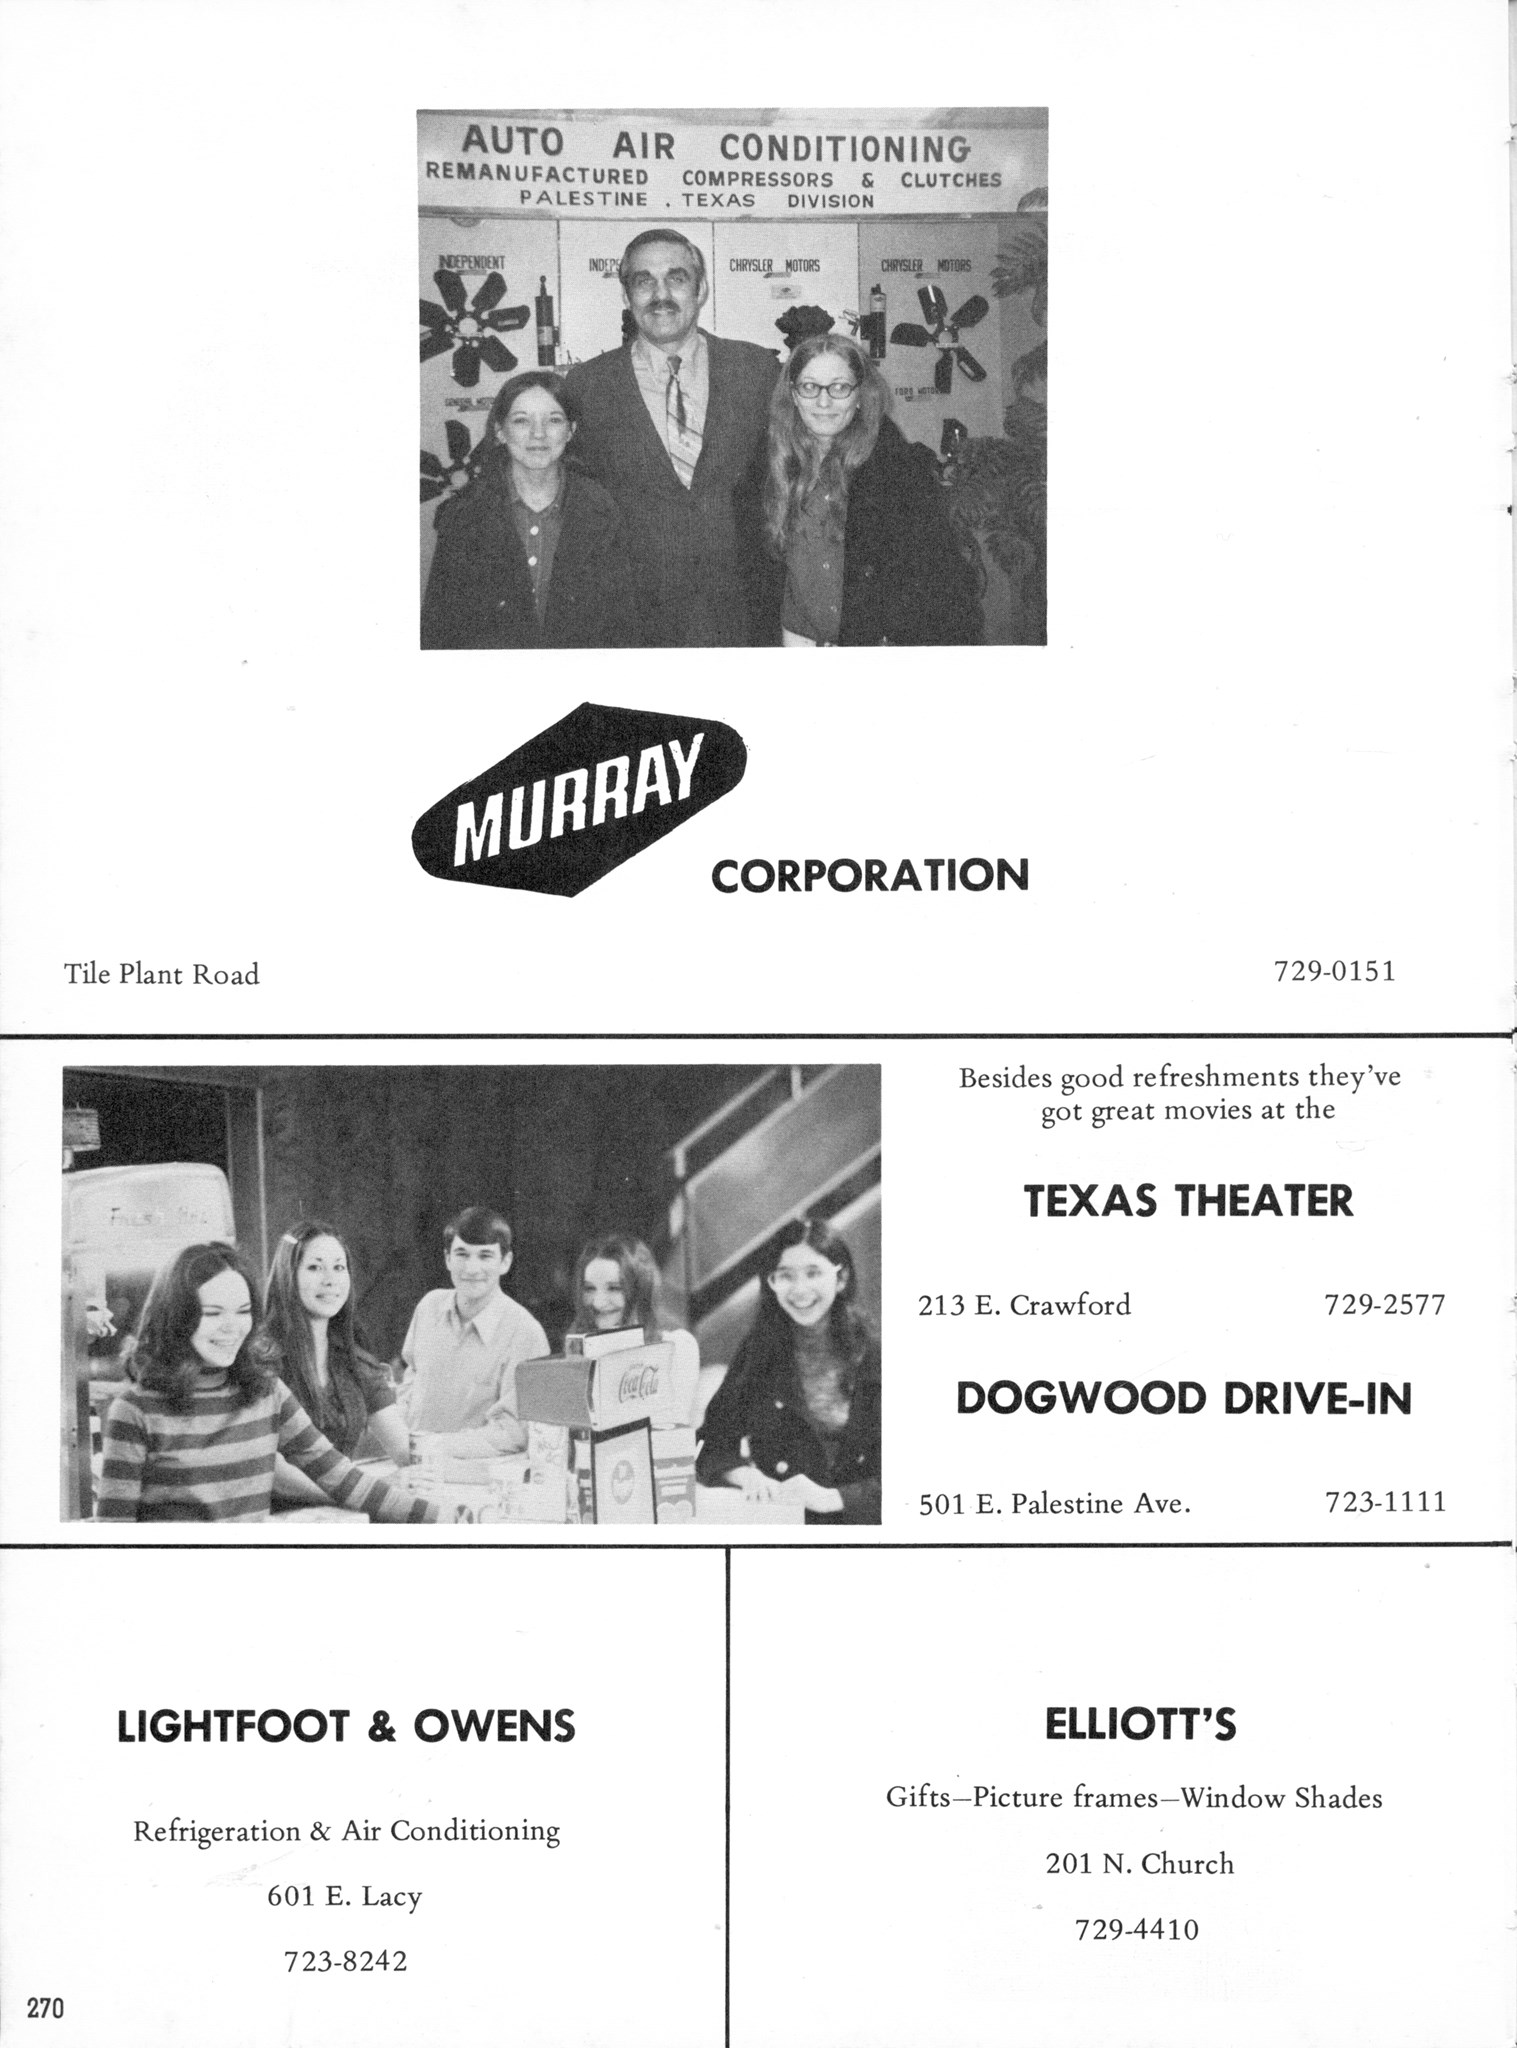 ../../../Images/Large/1972/Arclight-1972-pg0270.jpg